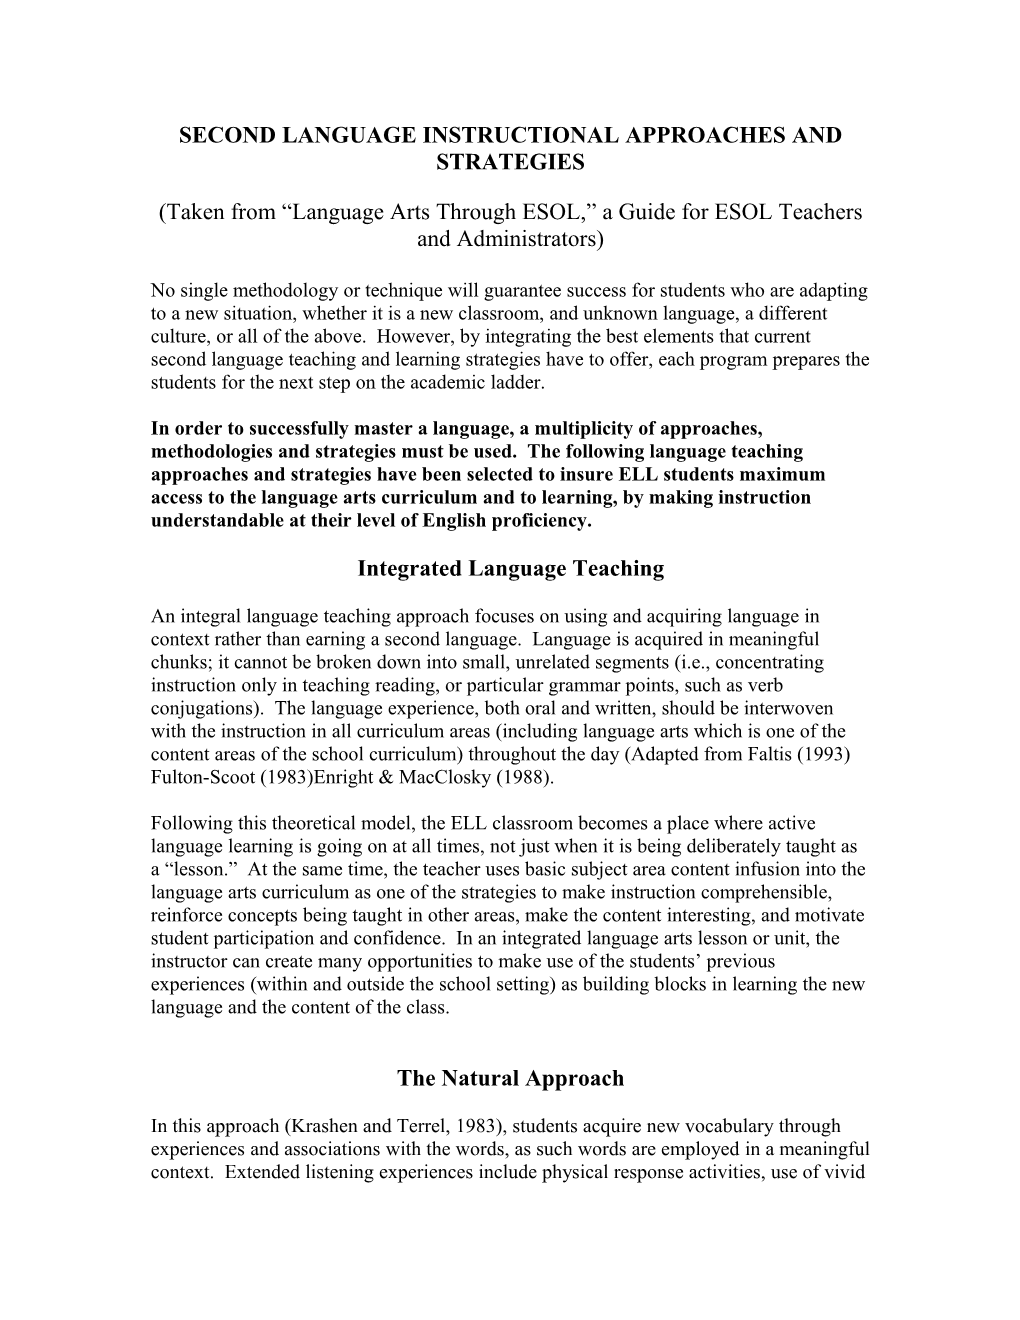 Second Language Instructional Approaches and Strategies